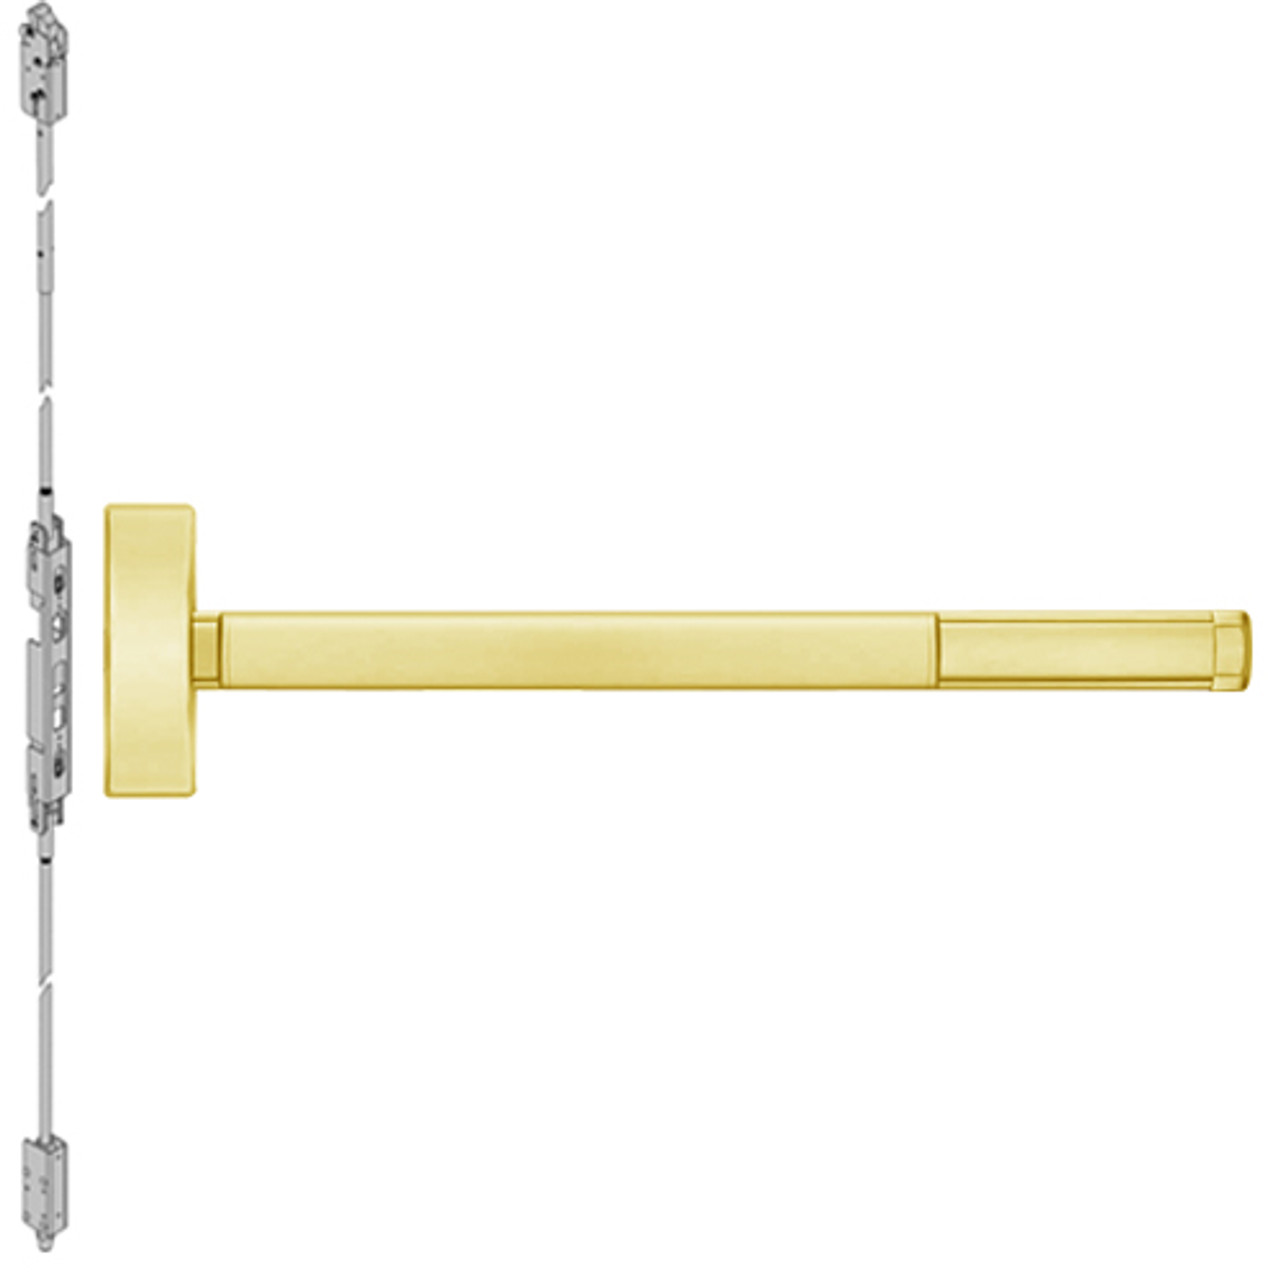 2808-605-48 PHI 2800 Series Non Fire Rated Concealed Vertical Rod Exit Device Prepped for Key Controls Lever-Knob in Bright Brass Finish